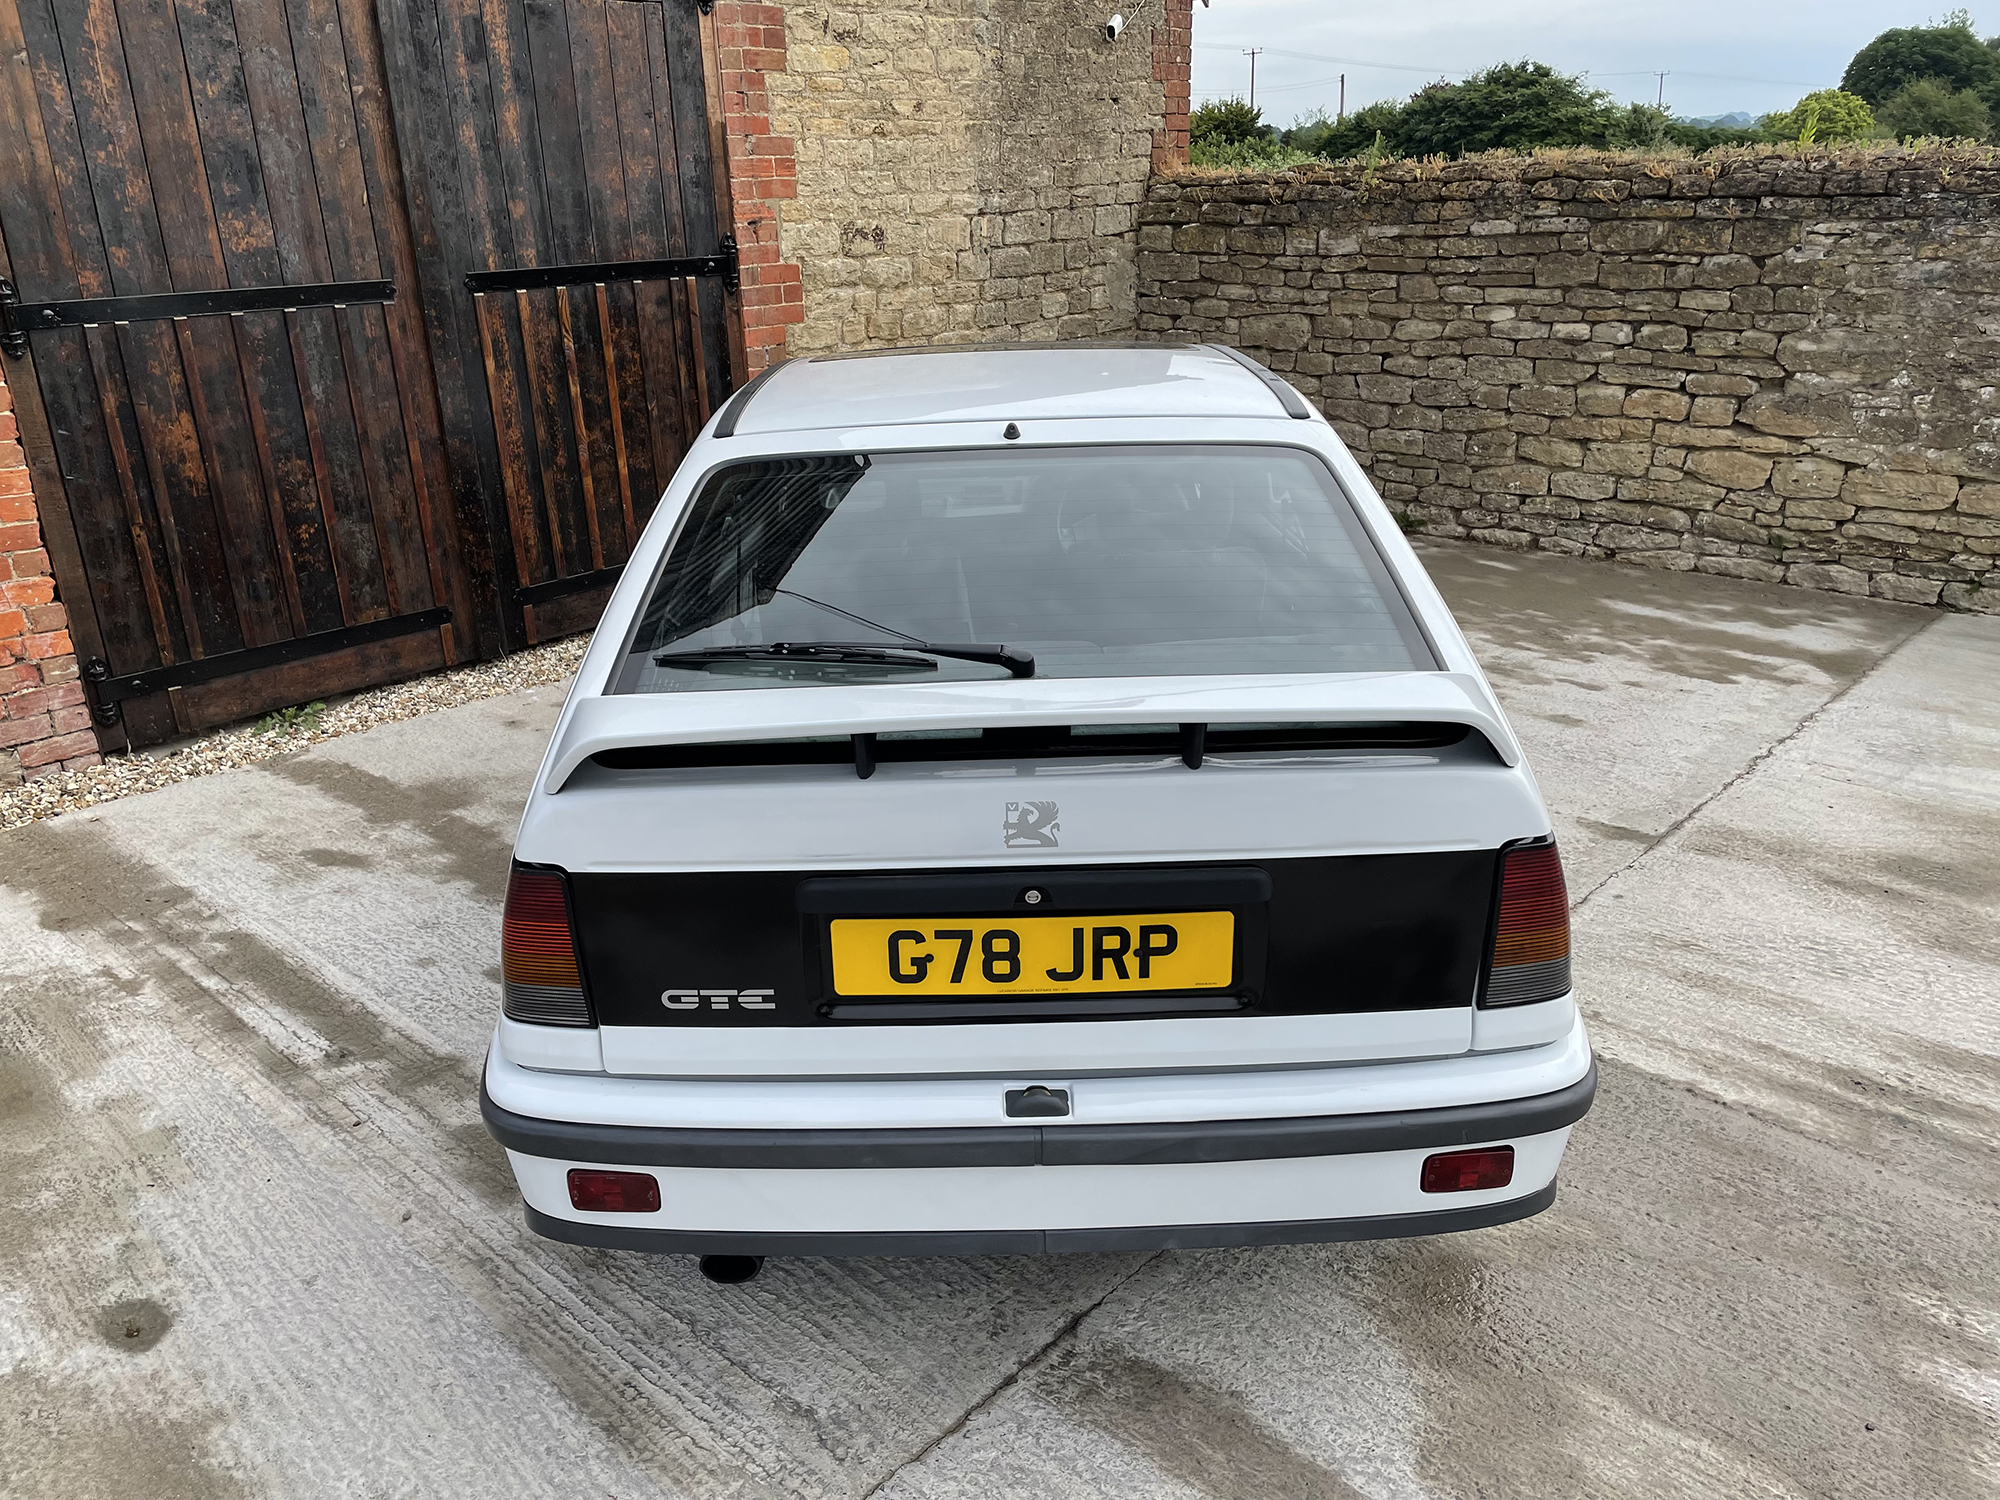 1989 Vauxhall Astra GTE 8V Reg. no. G78 JRP Chassis no. W0L000043LE112697 - Image 7 of 18